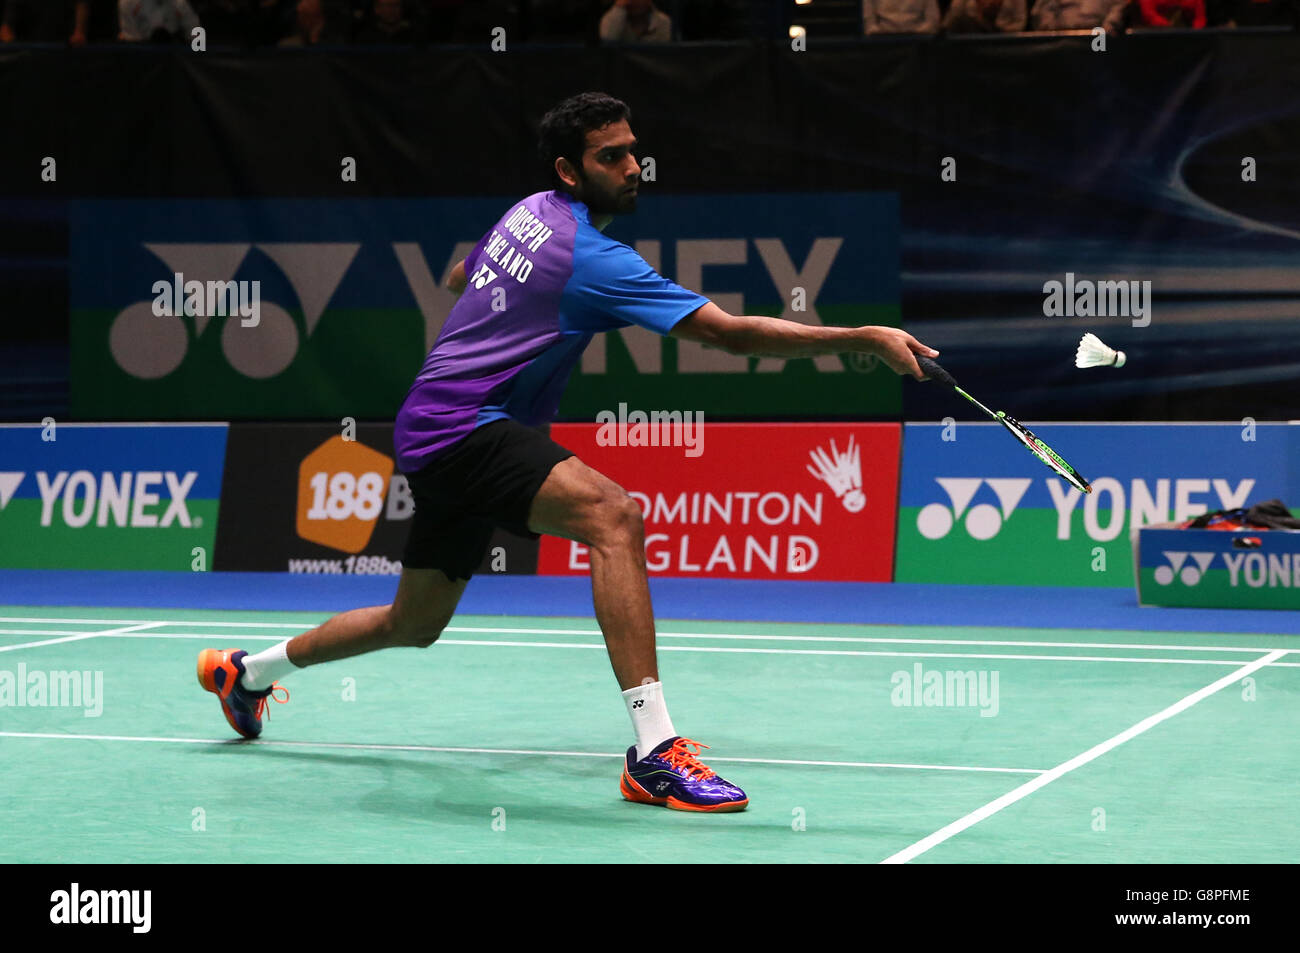 England's Rajiv Ouseph in action during his single's match match during day one of the YONEX All England Open Badminton Championships at the Barclaycard Arena, Birmingham. Stock Photo